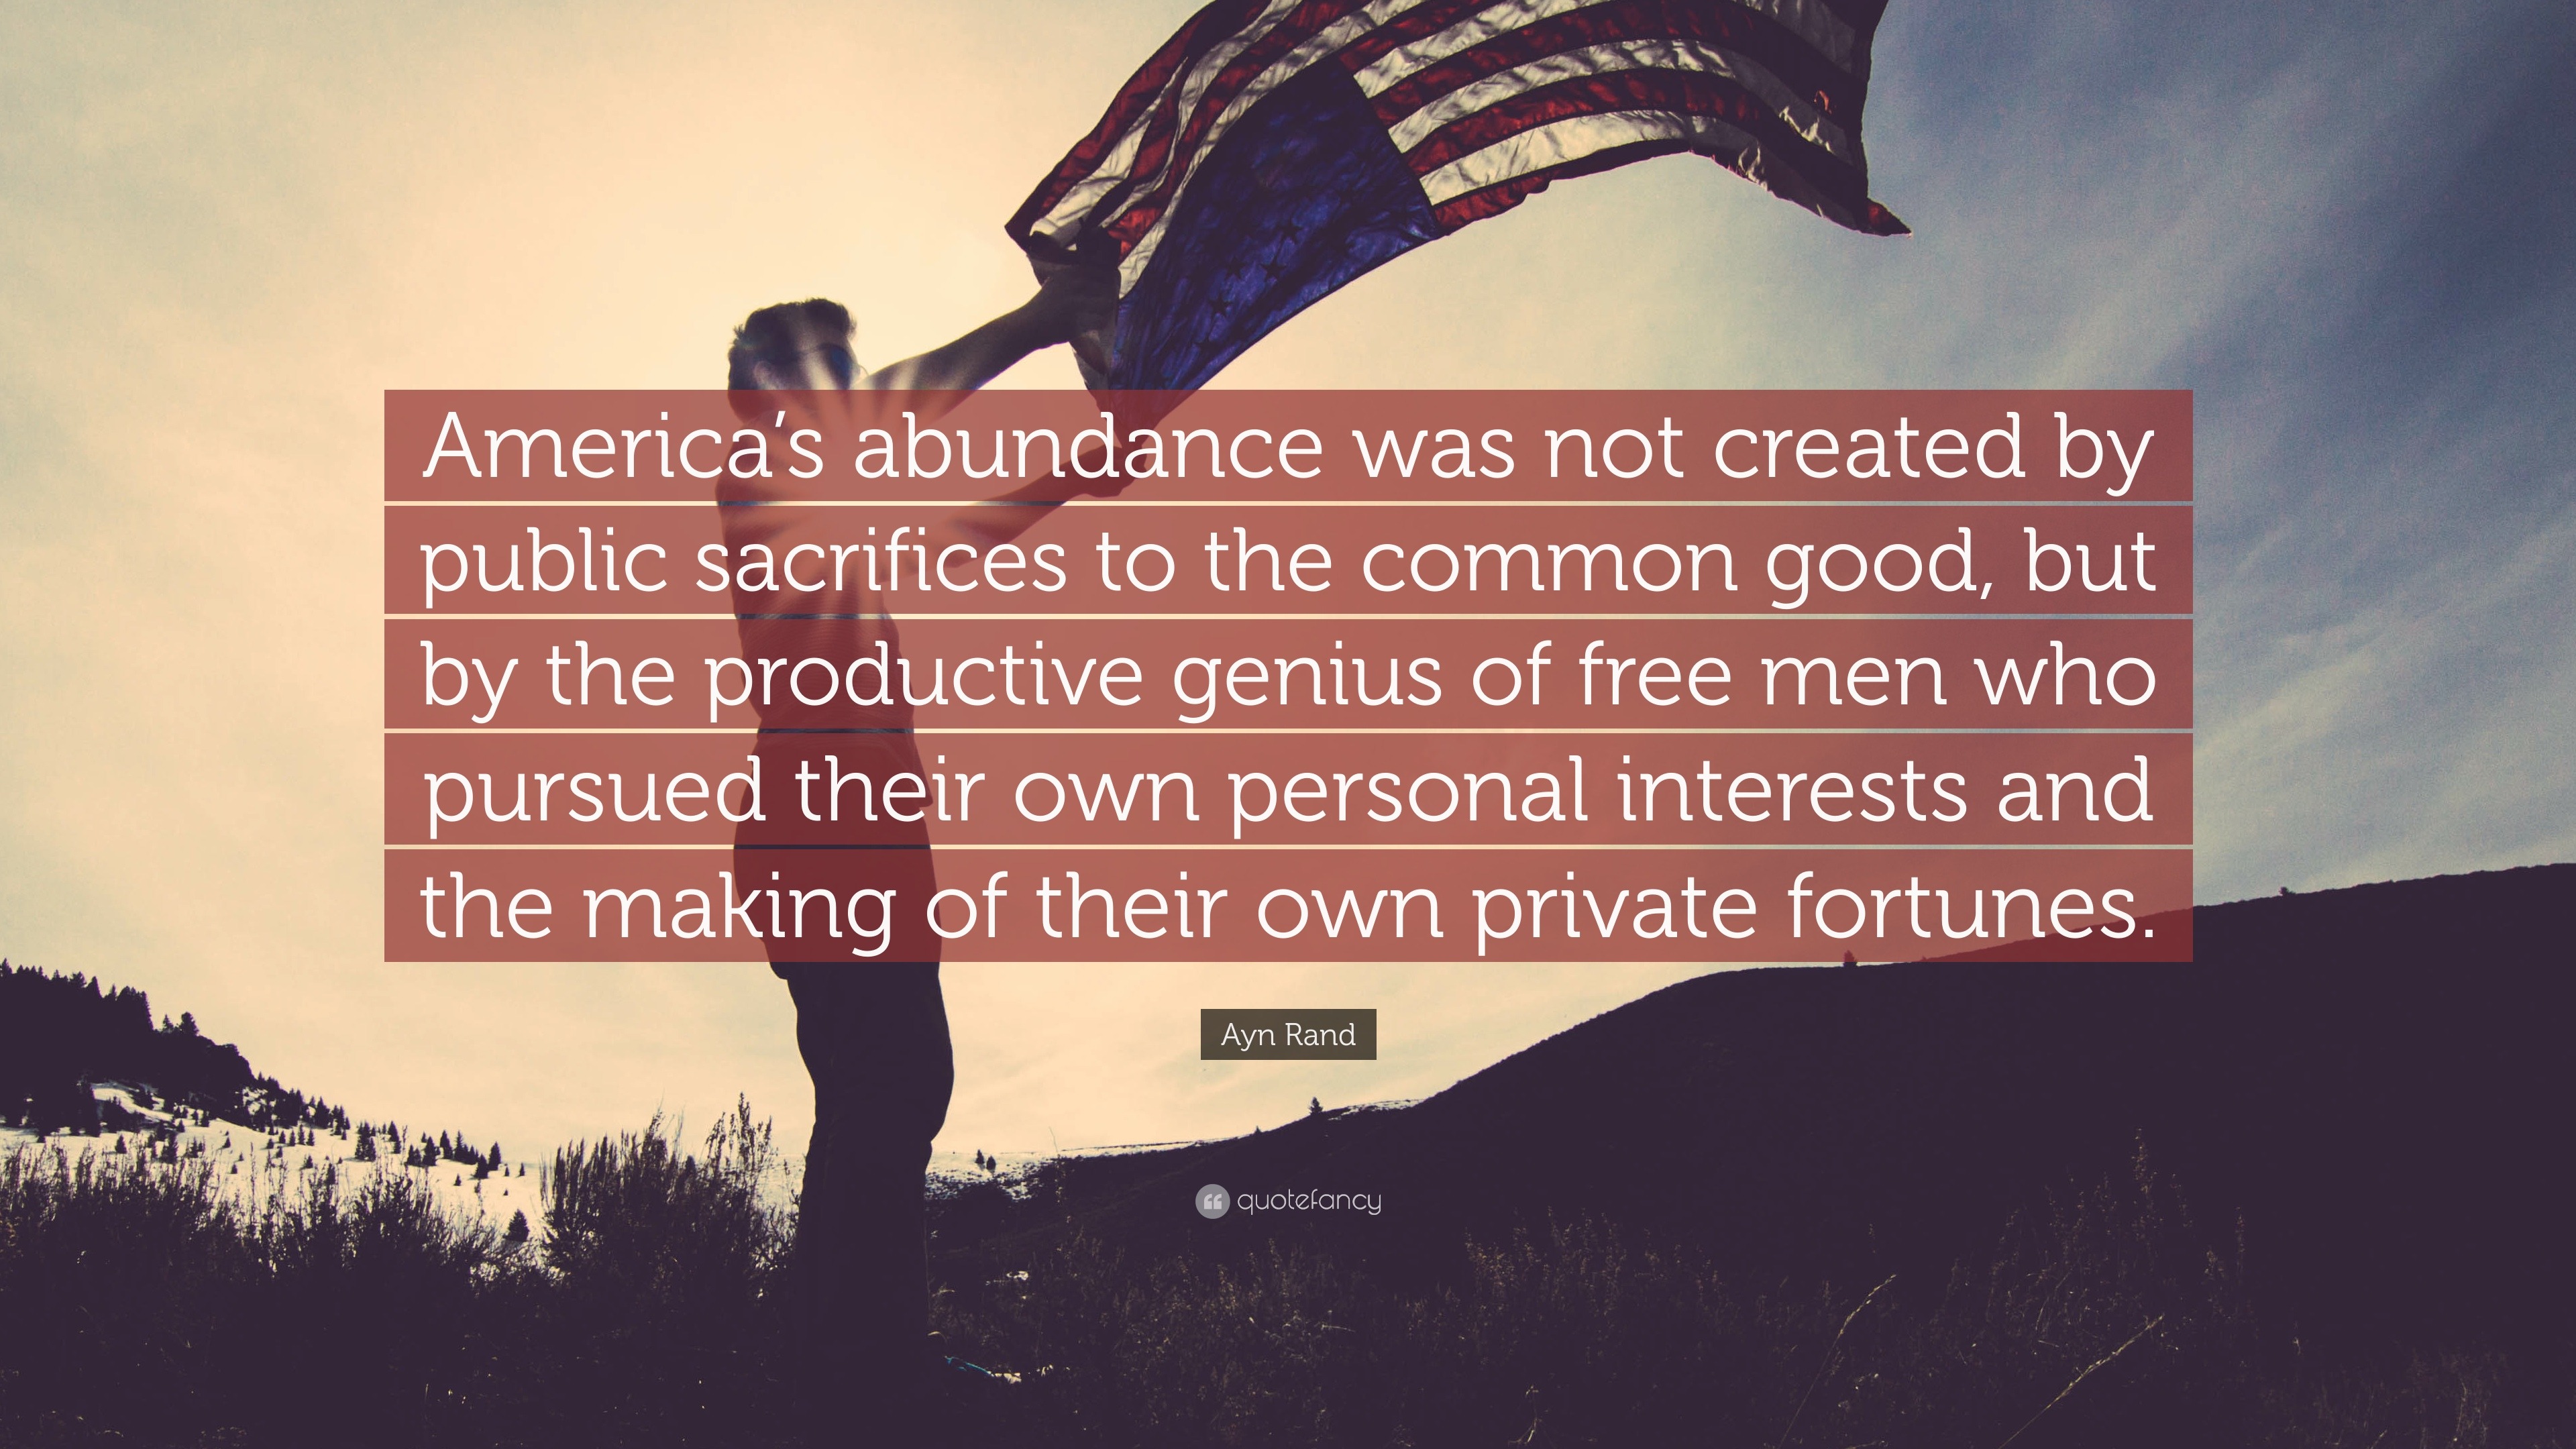 Ayn Rand Quote: “America's abundance was not created by public